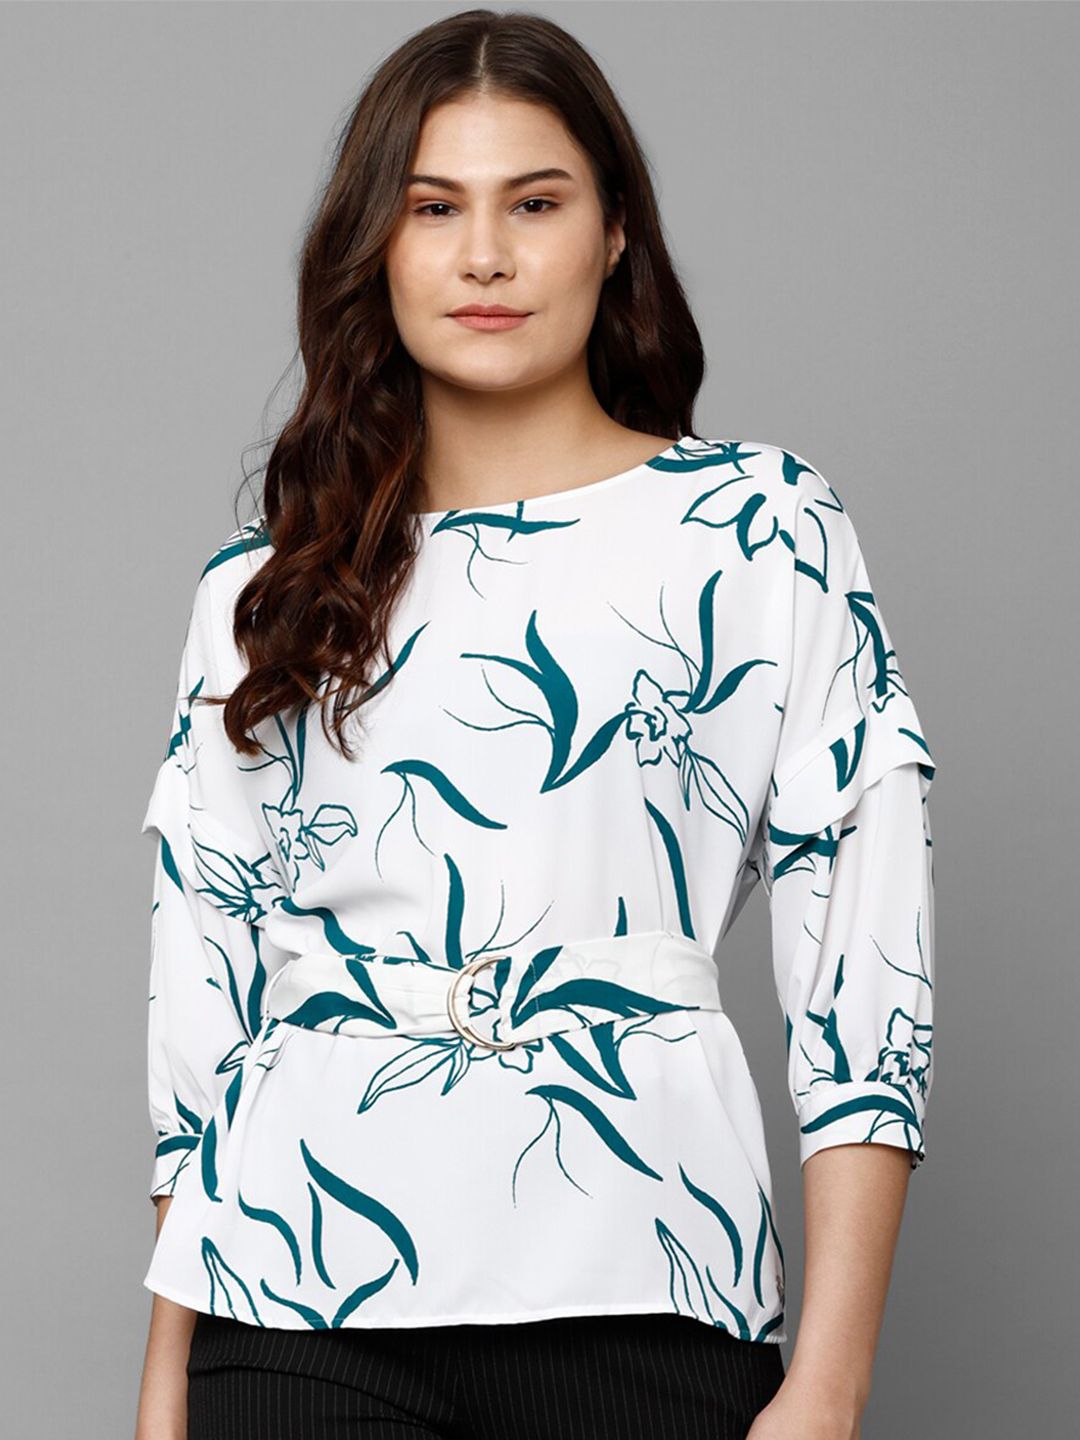 Allen Solly Woman Floral Print Top Price in India